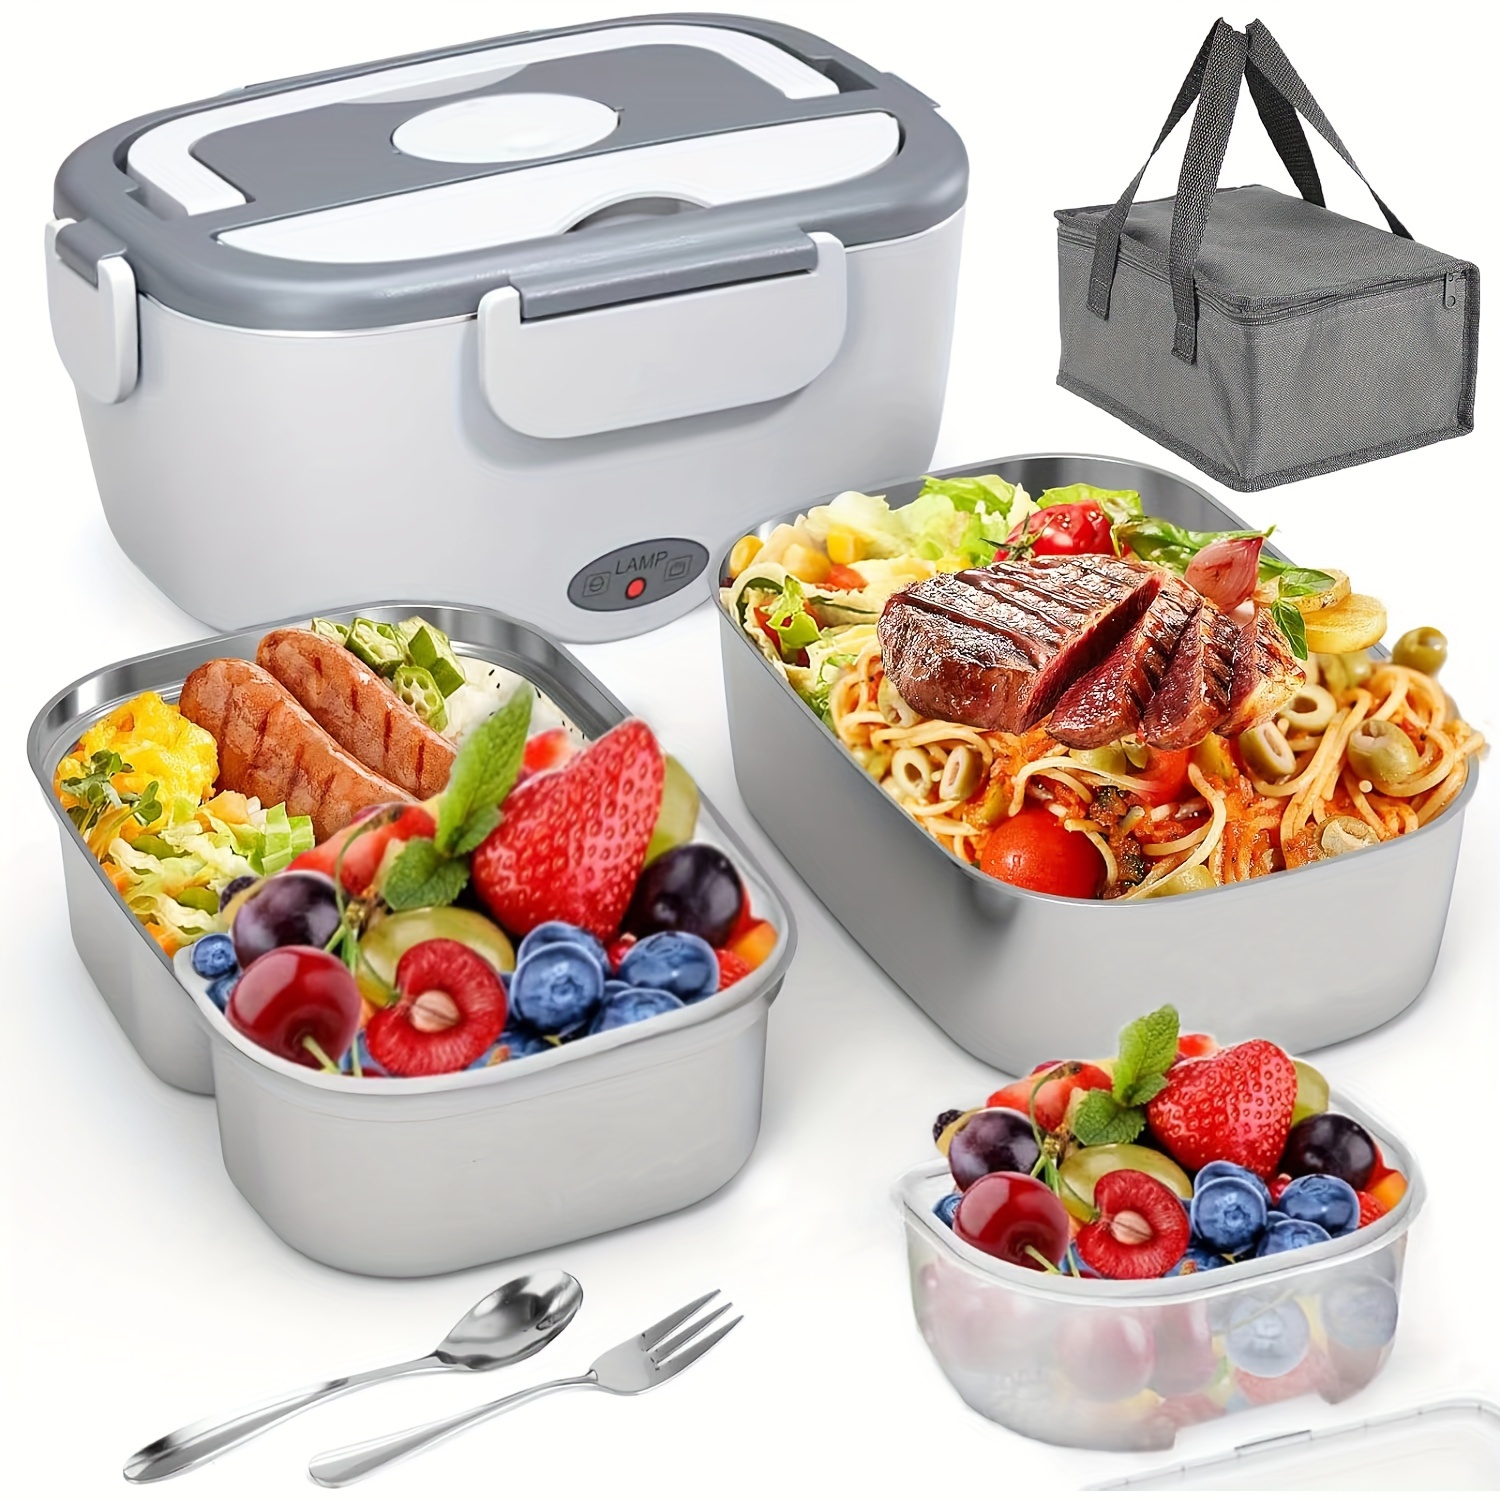 

Electric Lunch Box - Portable Fast Heating Lunch Box (12v/24v/110v) Stainless Steel Container Adult Food Warmer With 1 Food Tray - Suitable For Cars, Trucks, Offices And Outdoors (white)